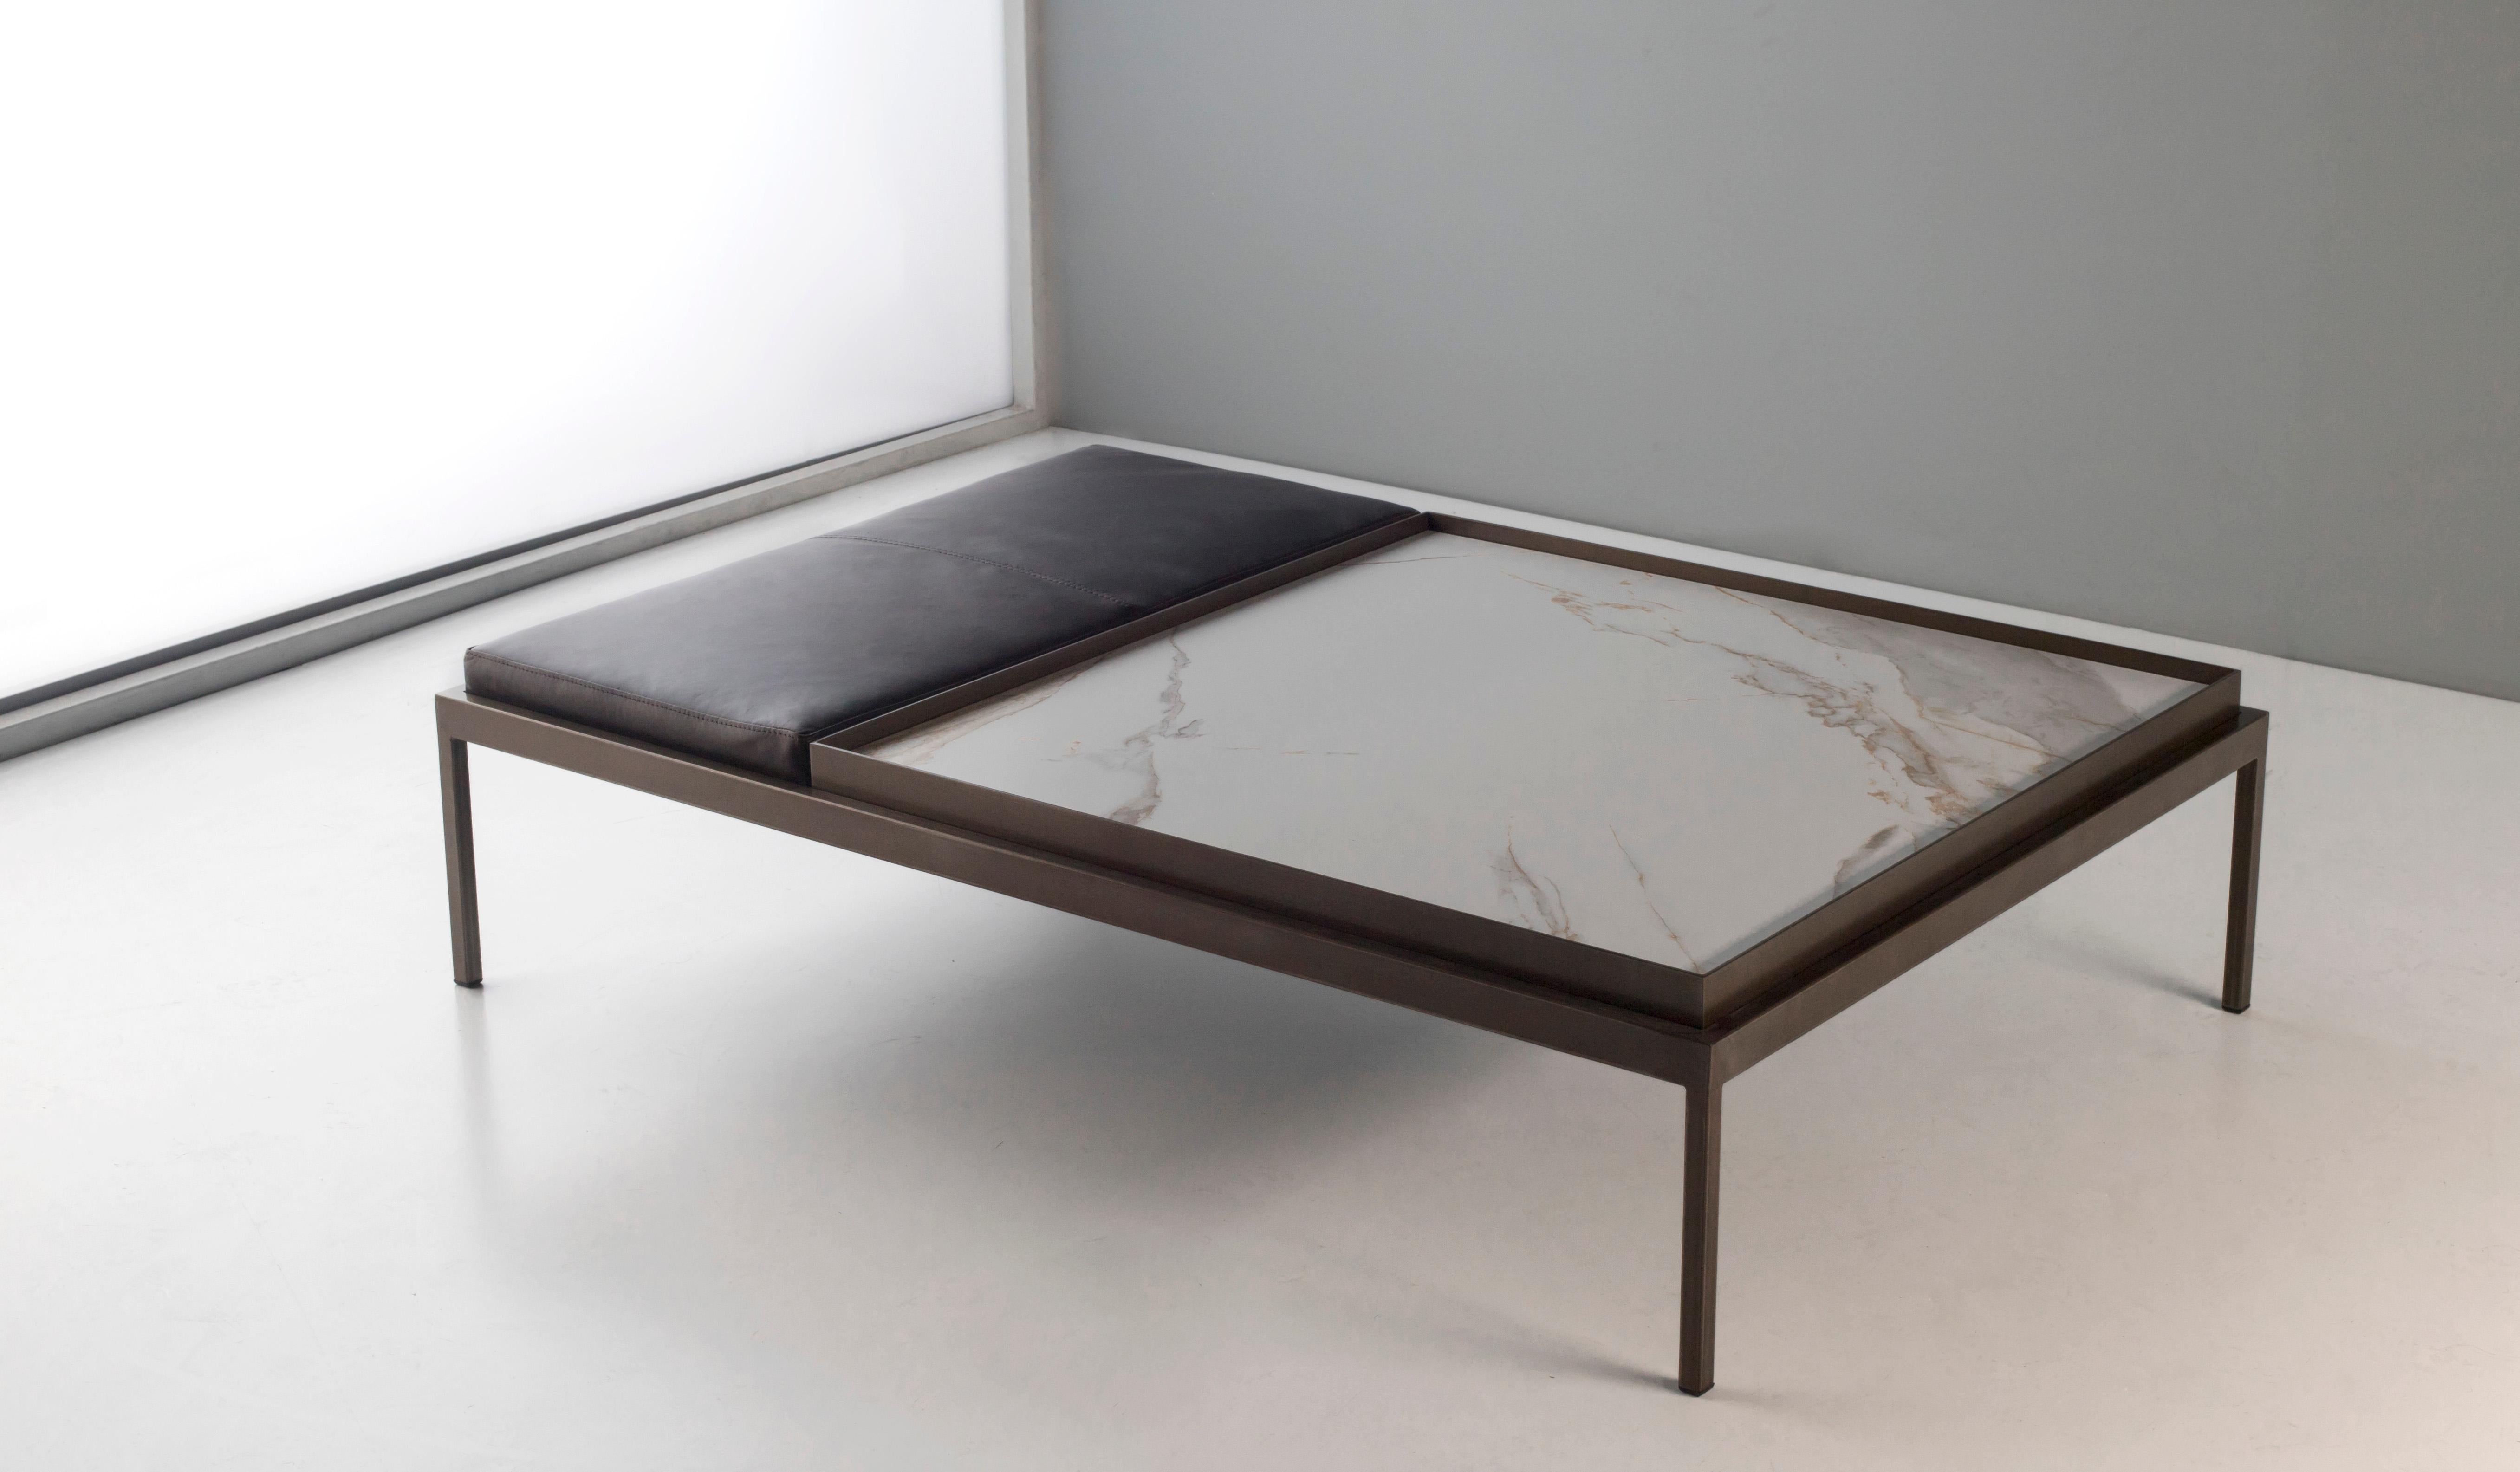 White Coffee Table by Doimo Brasil
Dimensions:  W 140 x D 95 x H 34 cm 
Materials: Base: Aged steel, Seat: Natural leather, Top: Ceramic.


With the intention of providing good taste and personality, Doimo deciphers trends and follows the evolution